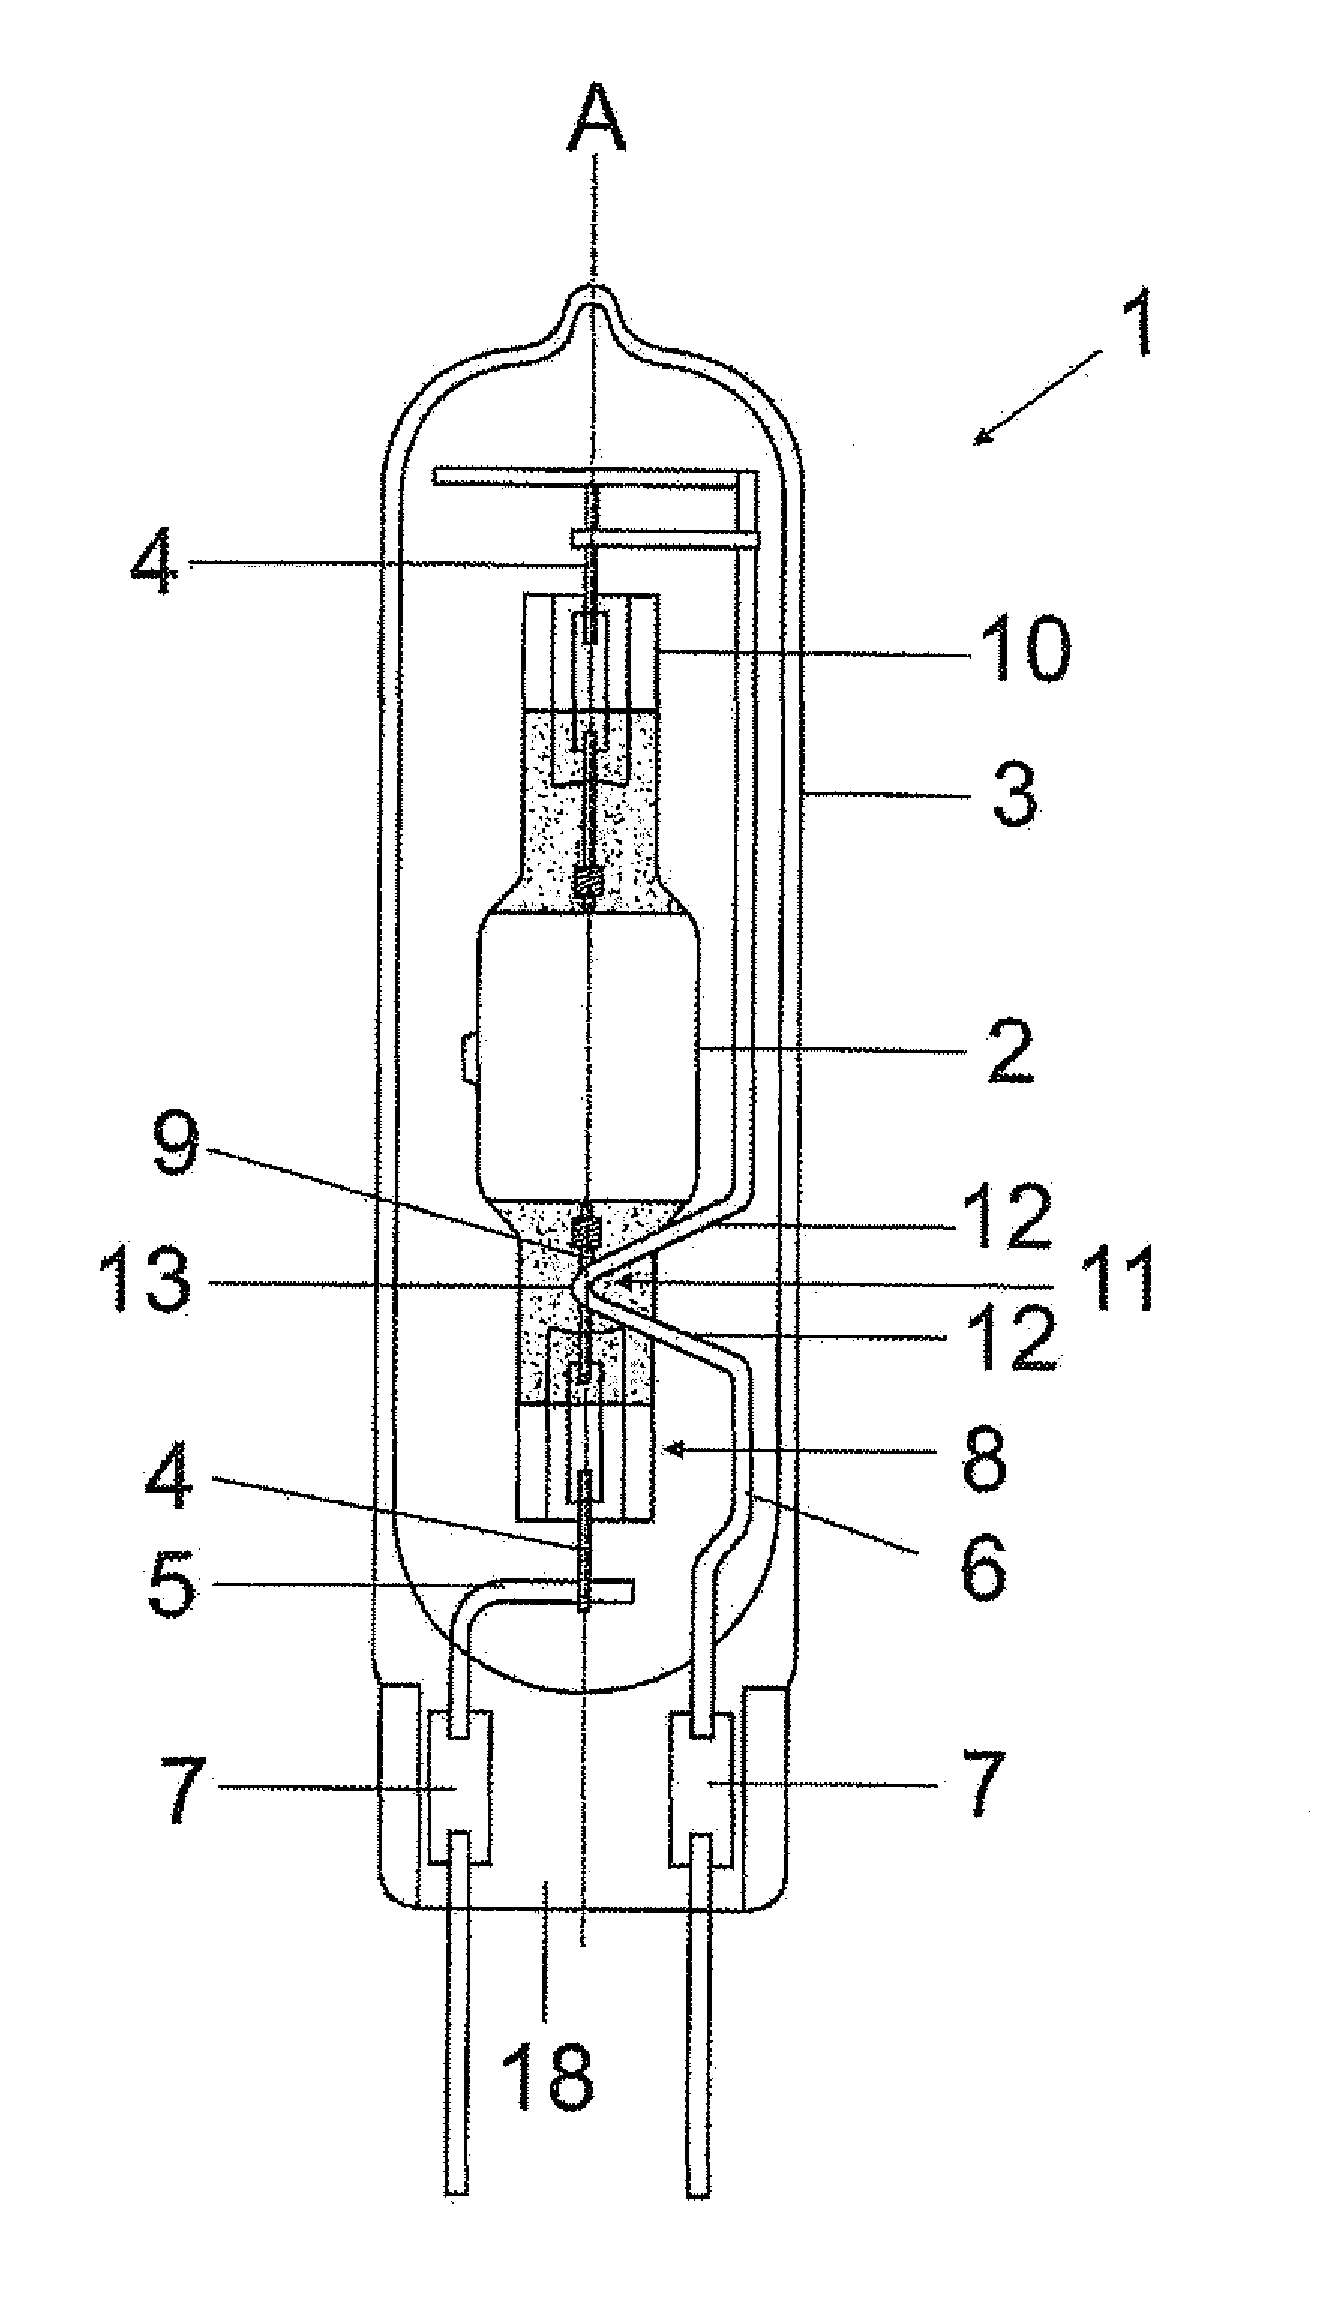 High-pressure discharge lamp with starting aid